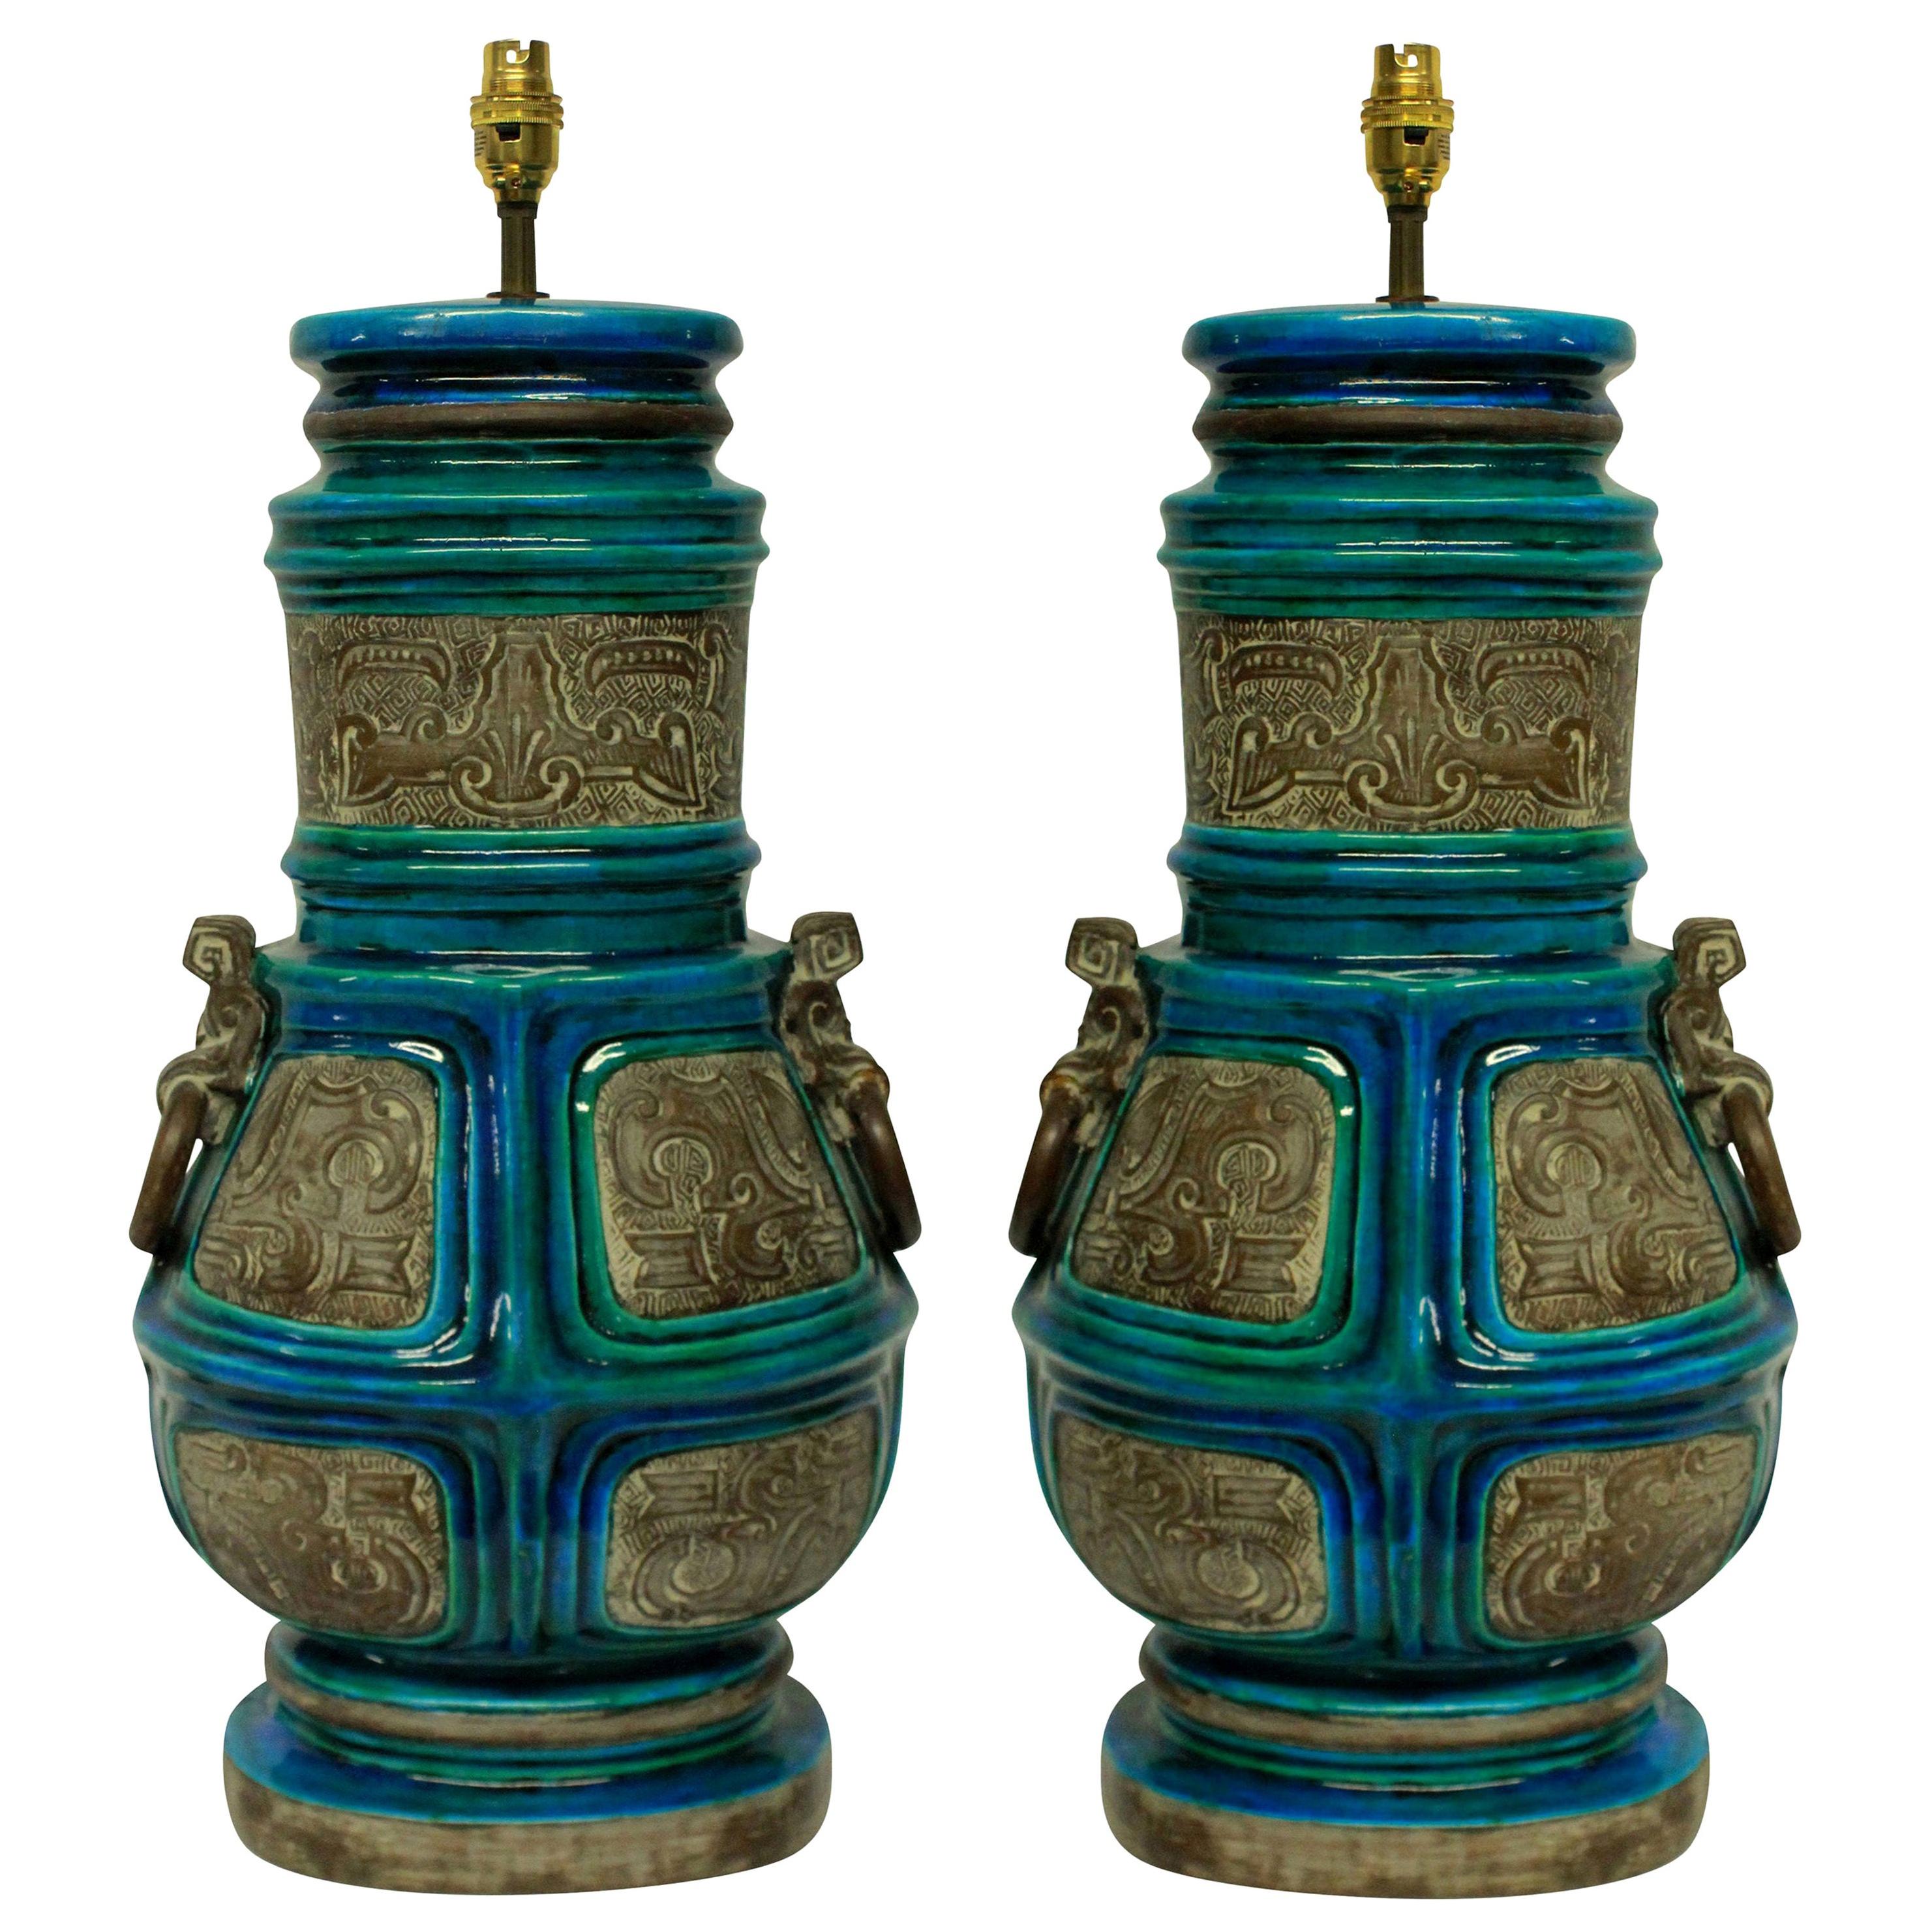 Large Pair of Ugo Zaccagnini Lamps